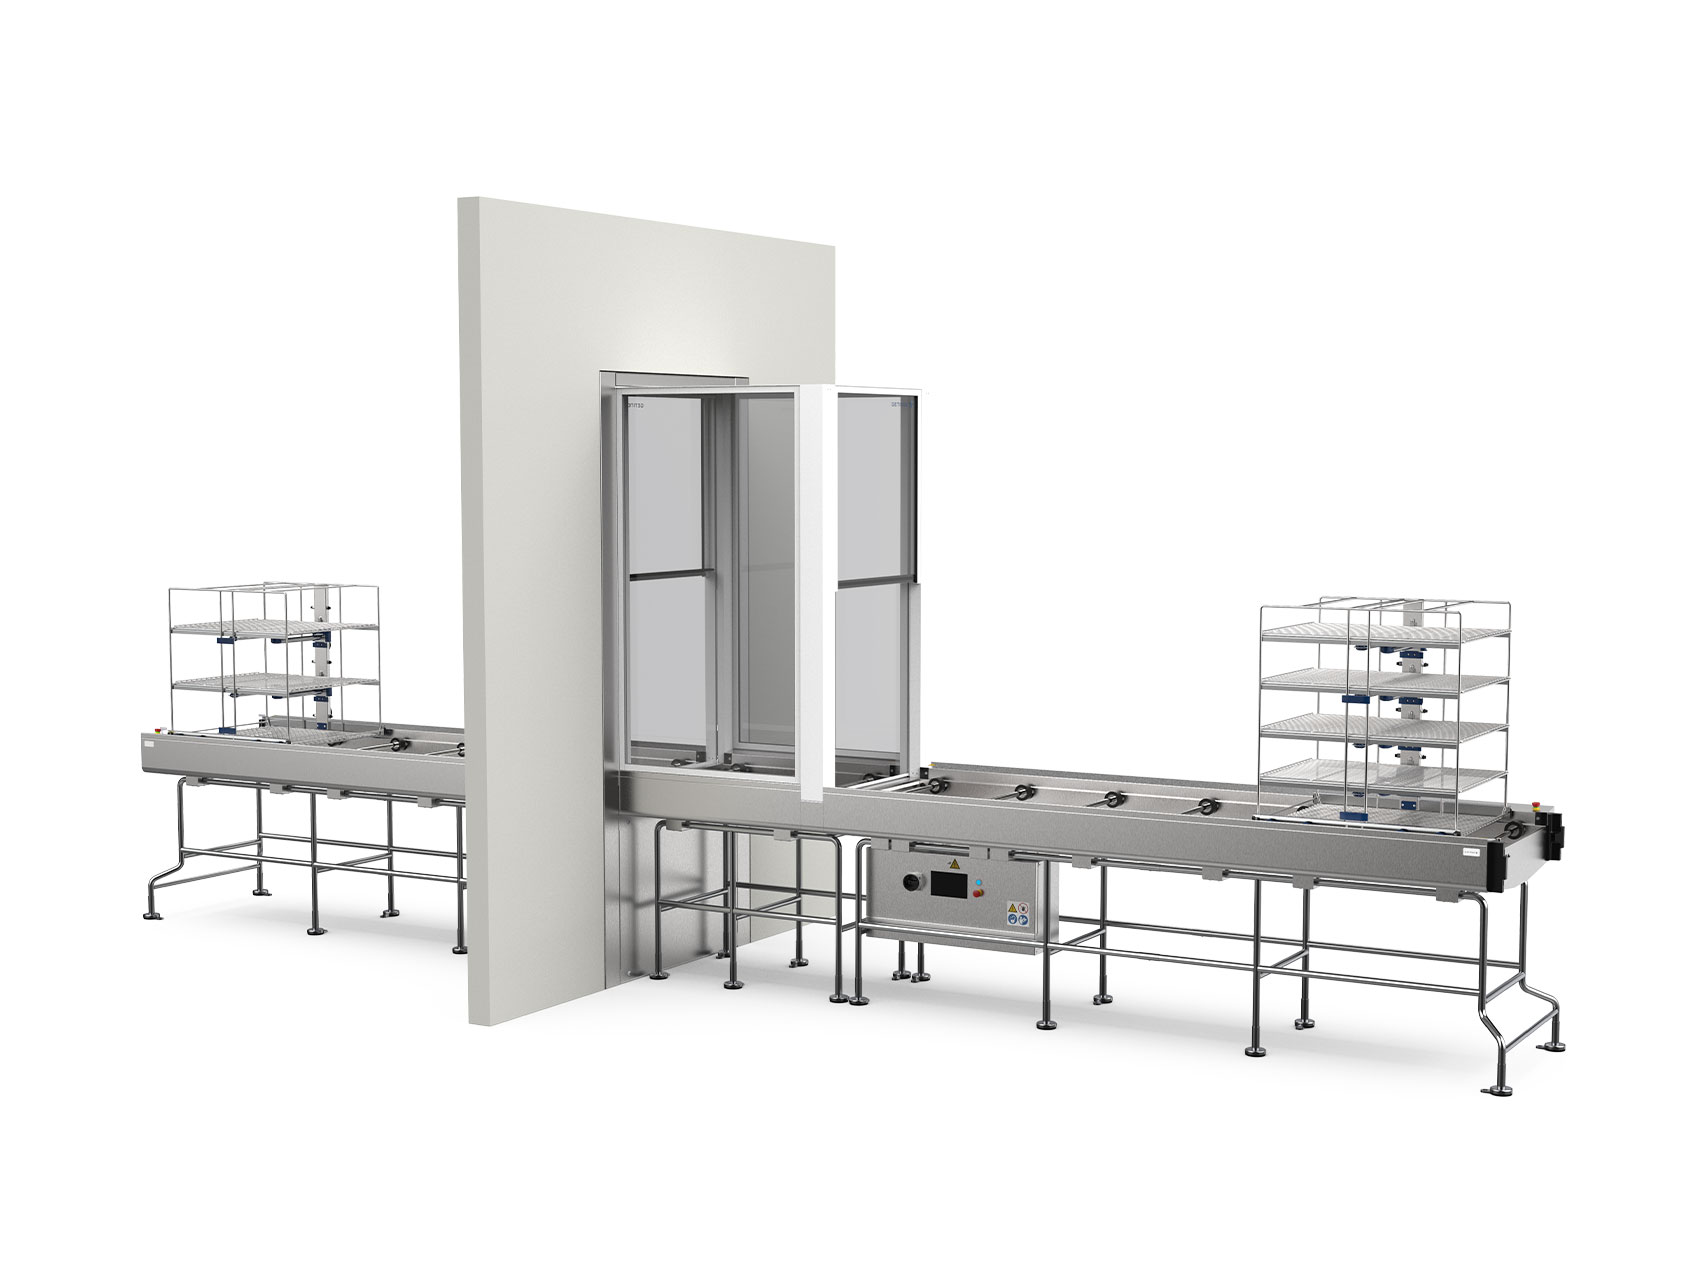 Pass-through chamber with loading and unloading conveyors for Getinge 86-series Washer-Disinfectors